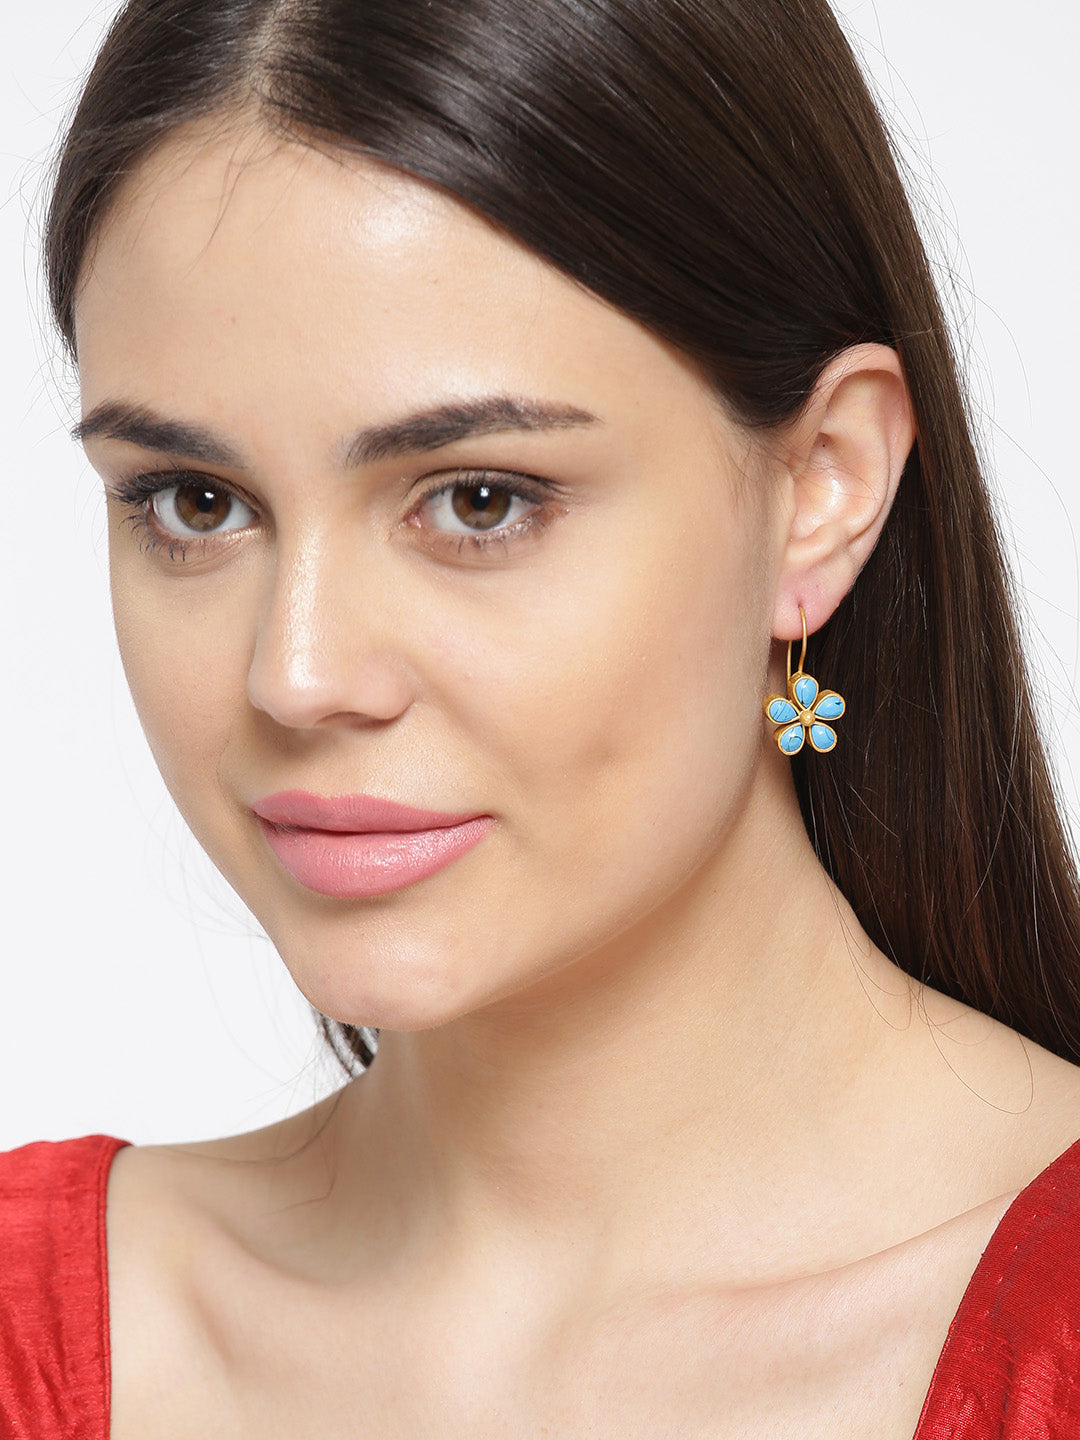 Turquoise Drop Earrings For Girls and Women